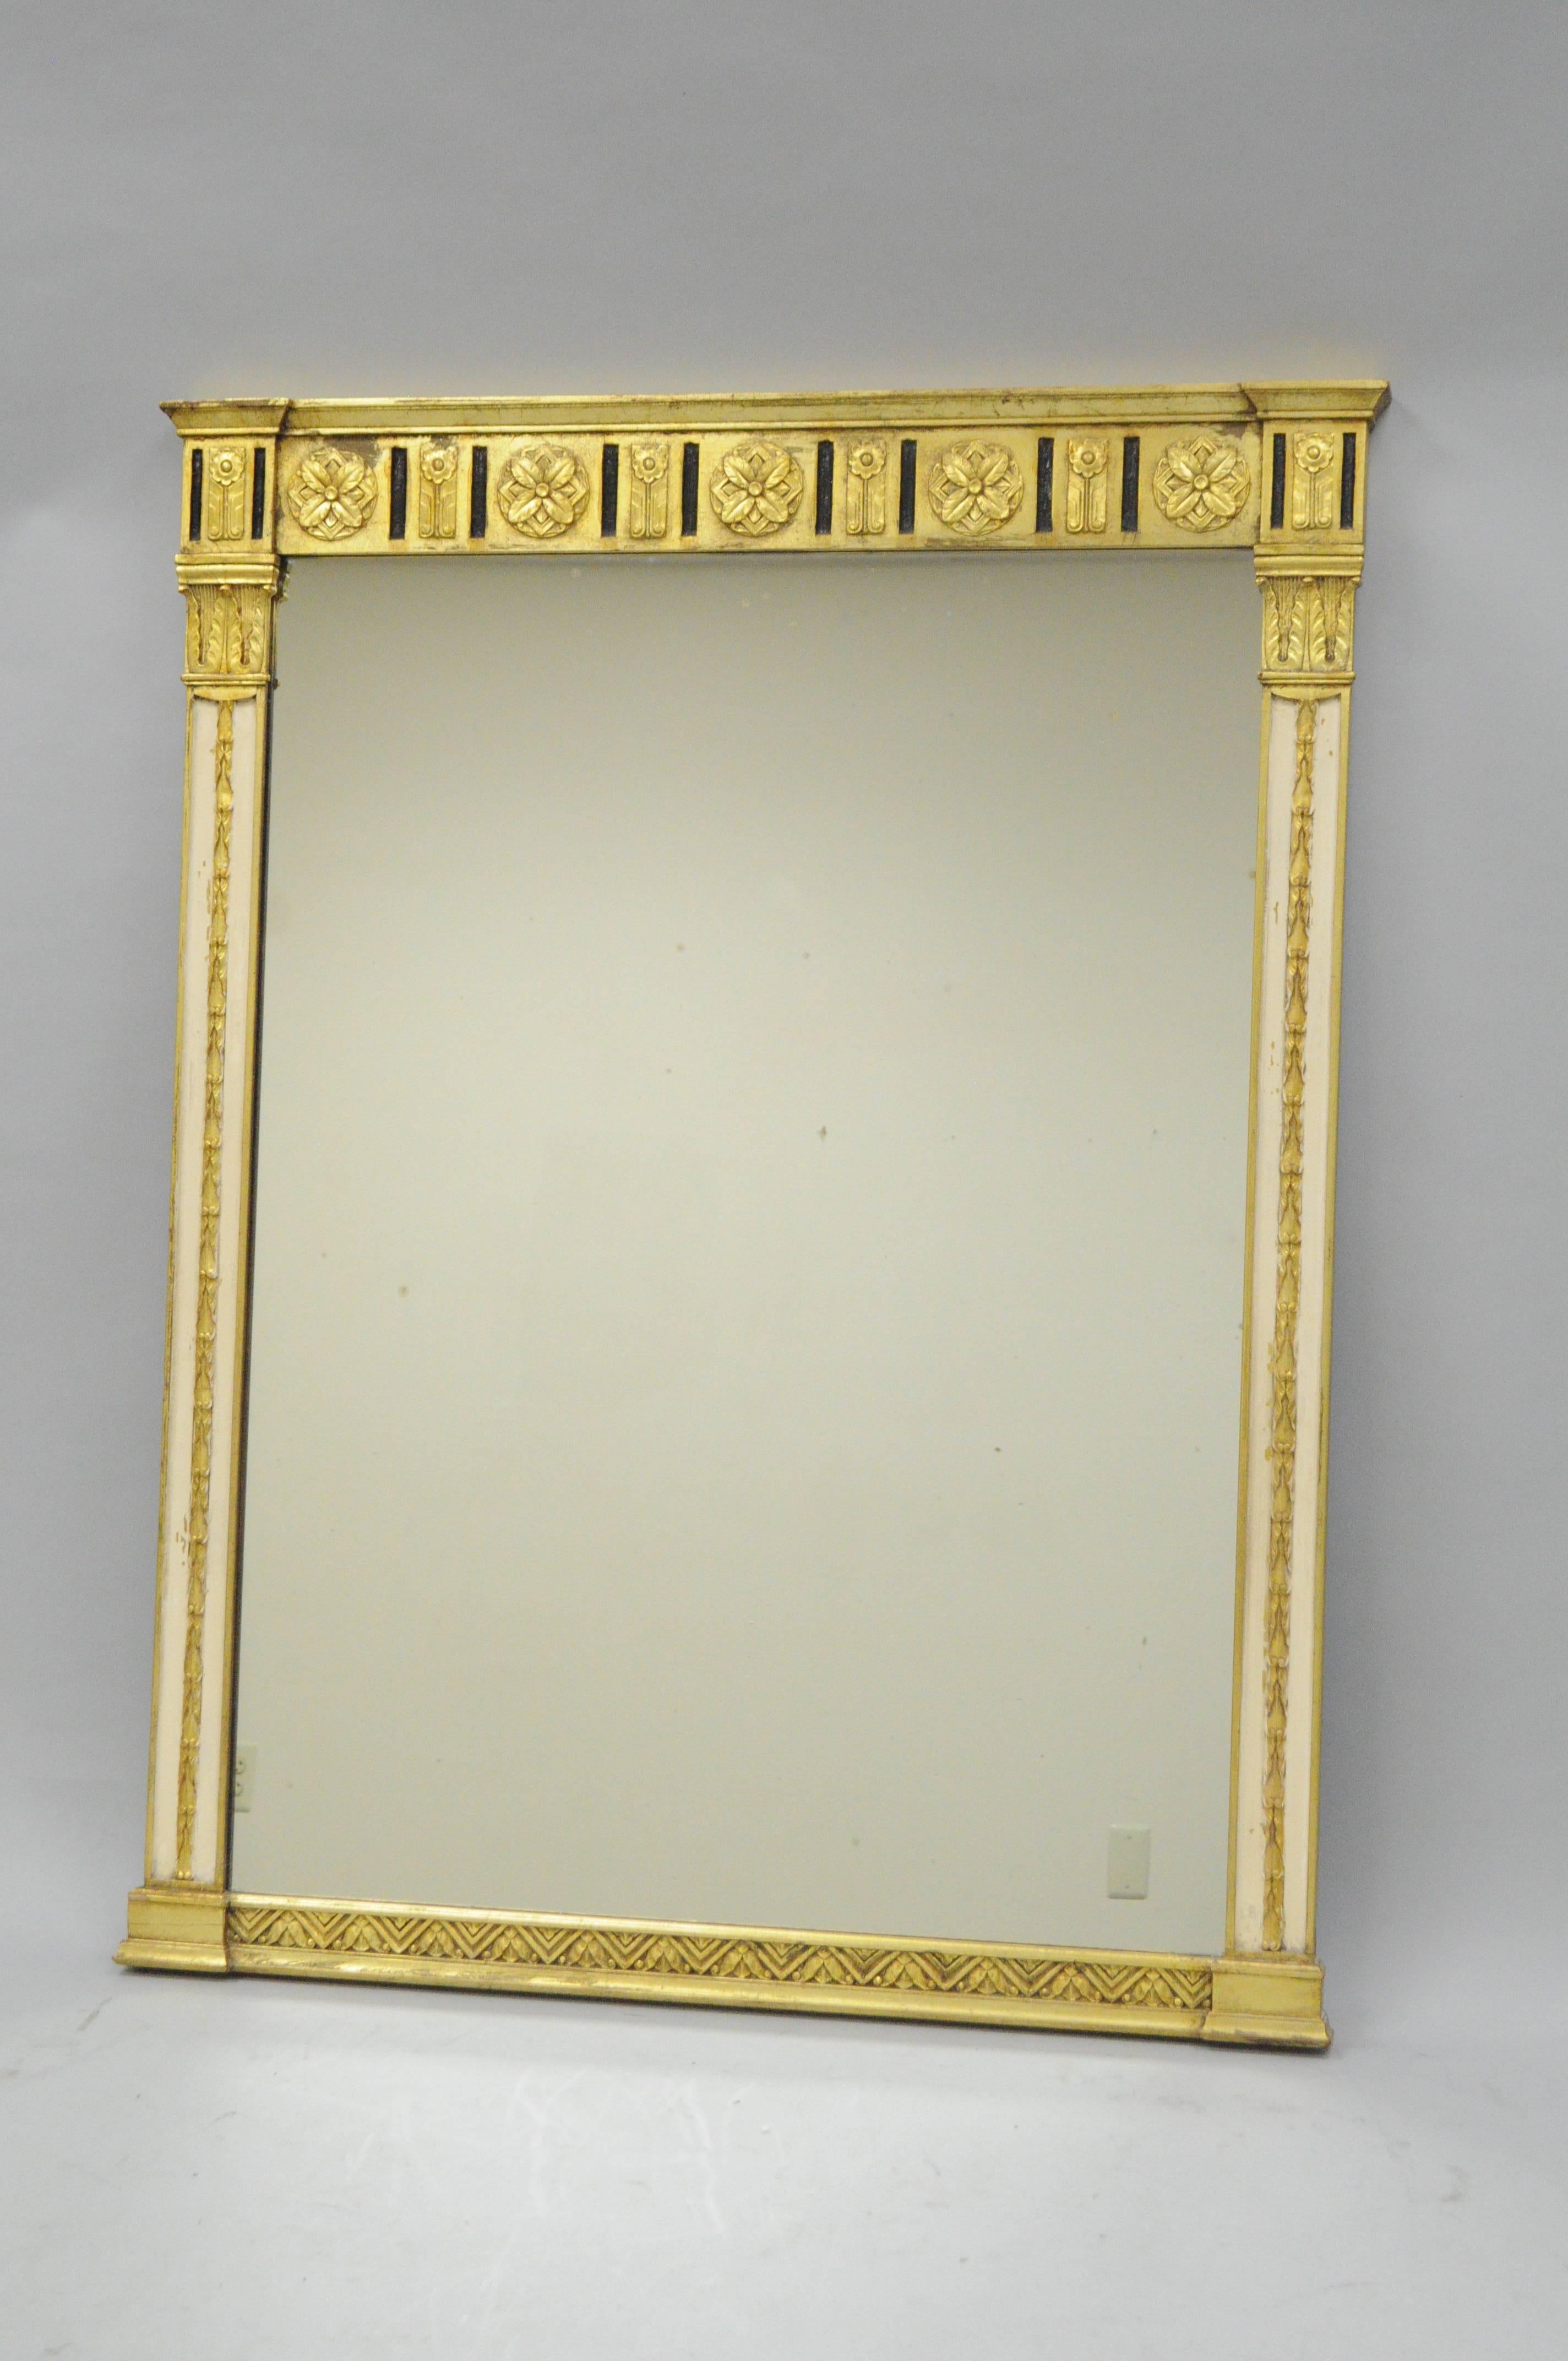 Impressive early 20th century Italian Classical style gold giltwood rectangular wall mirror. Item features a giltwood frame with gold, black, and cream accents, and very nice quality and form. Great for use as a pier mirror or above a console or